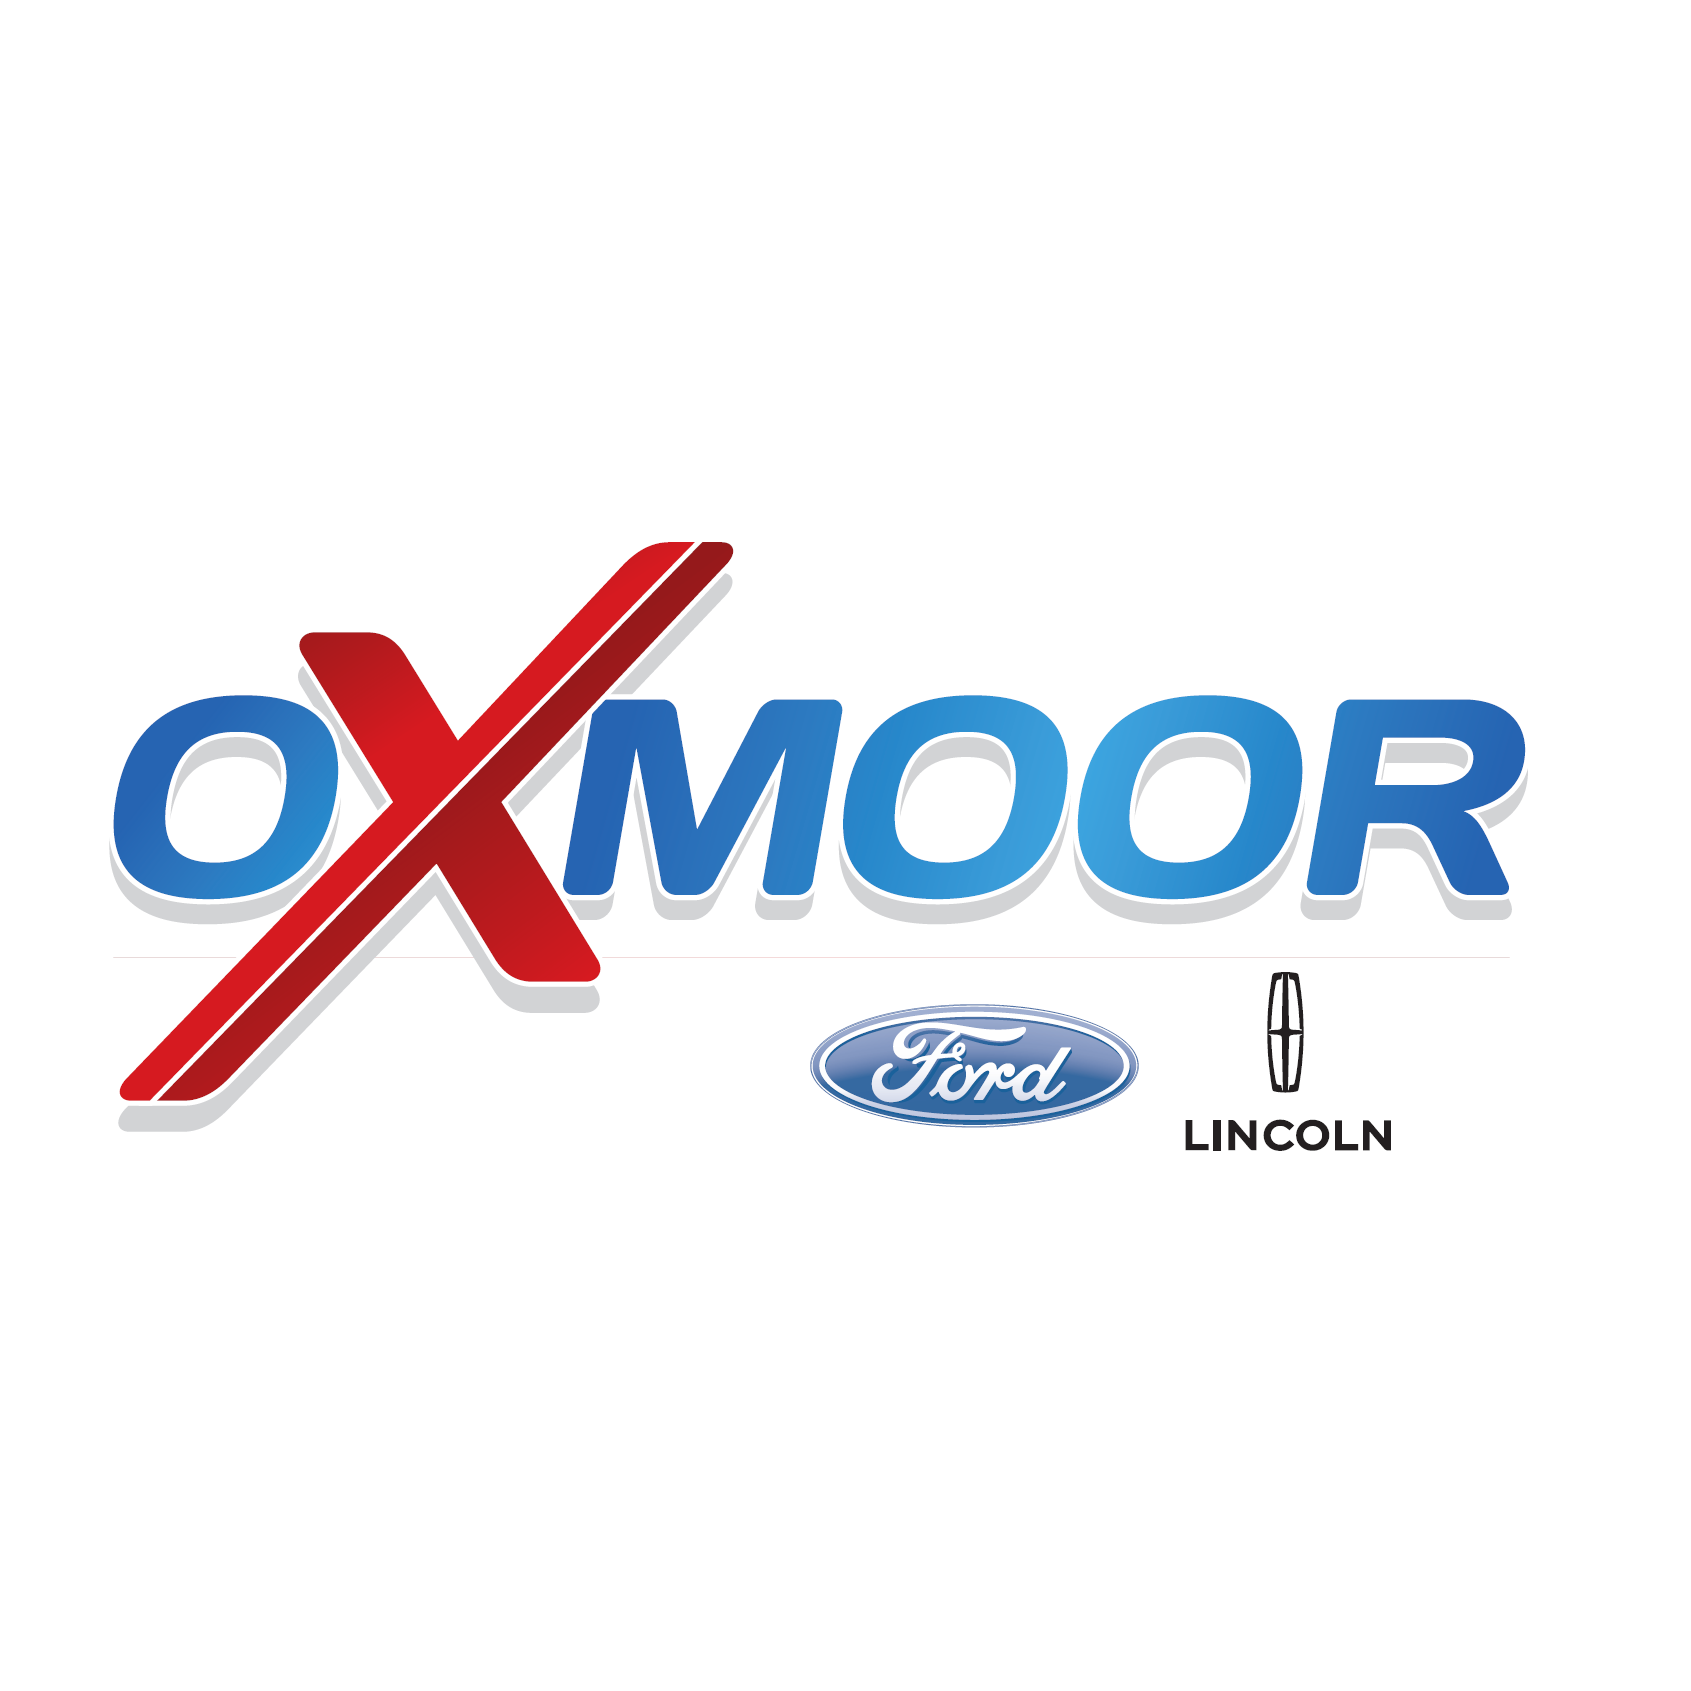 Oxmoor Ford Lincoln